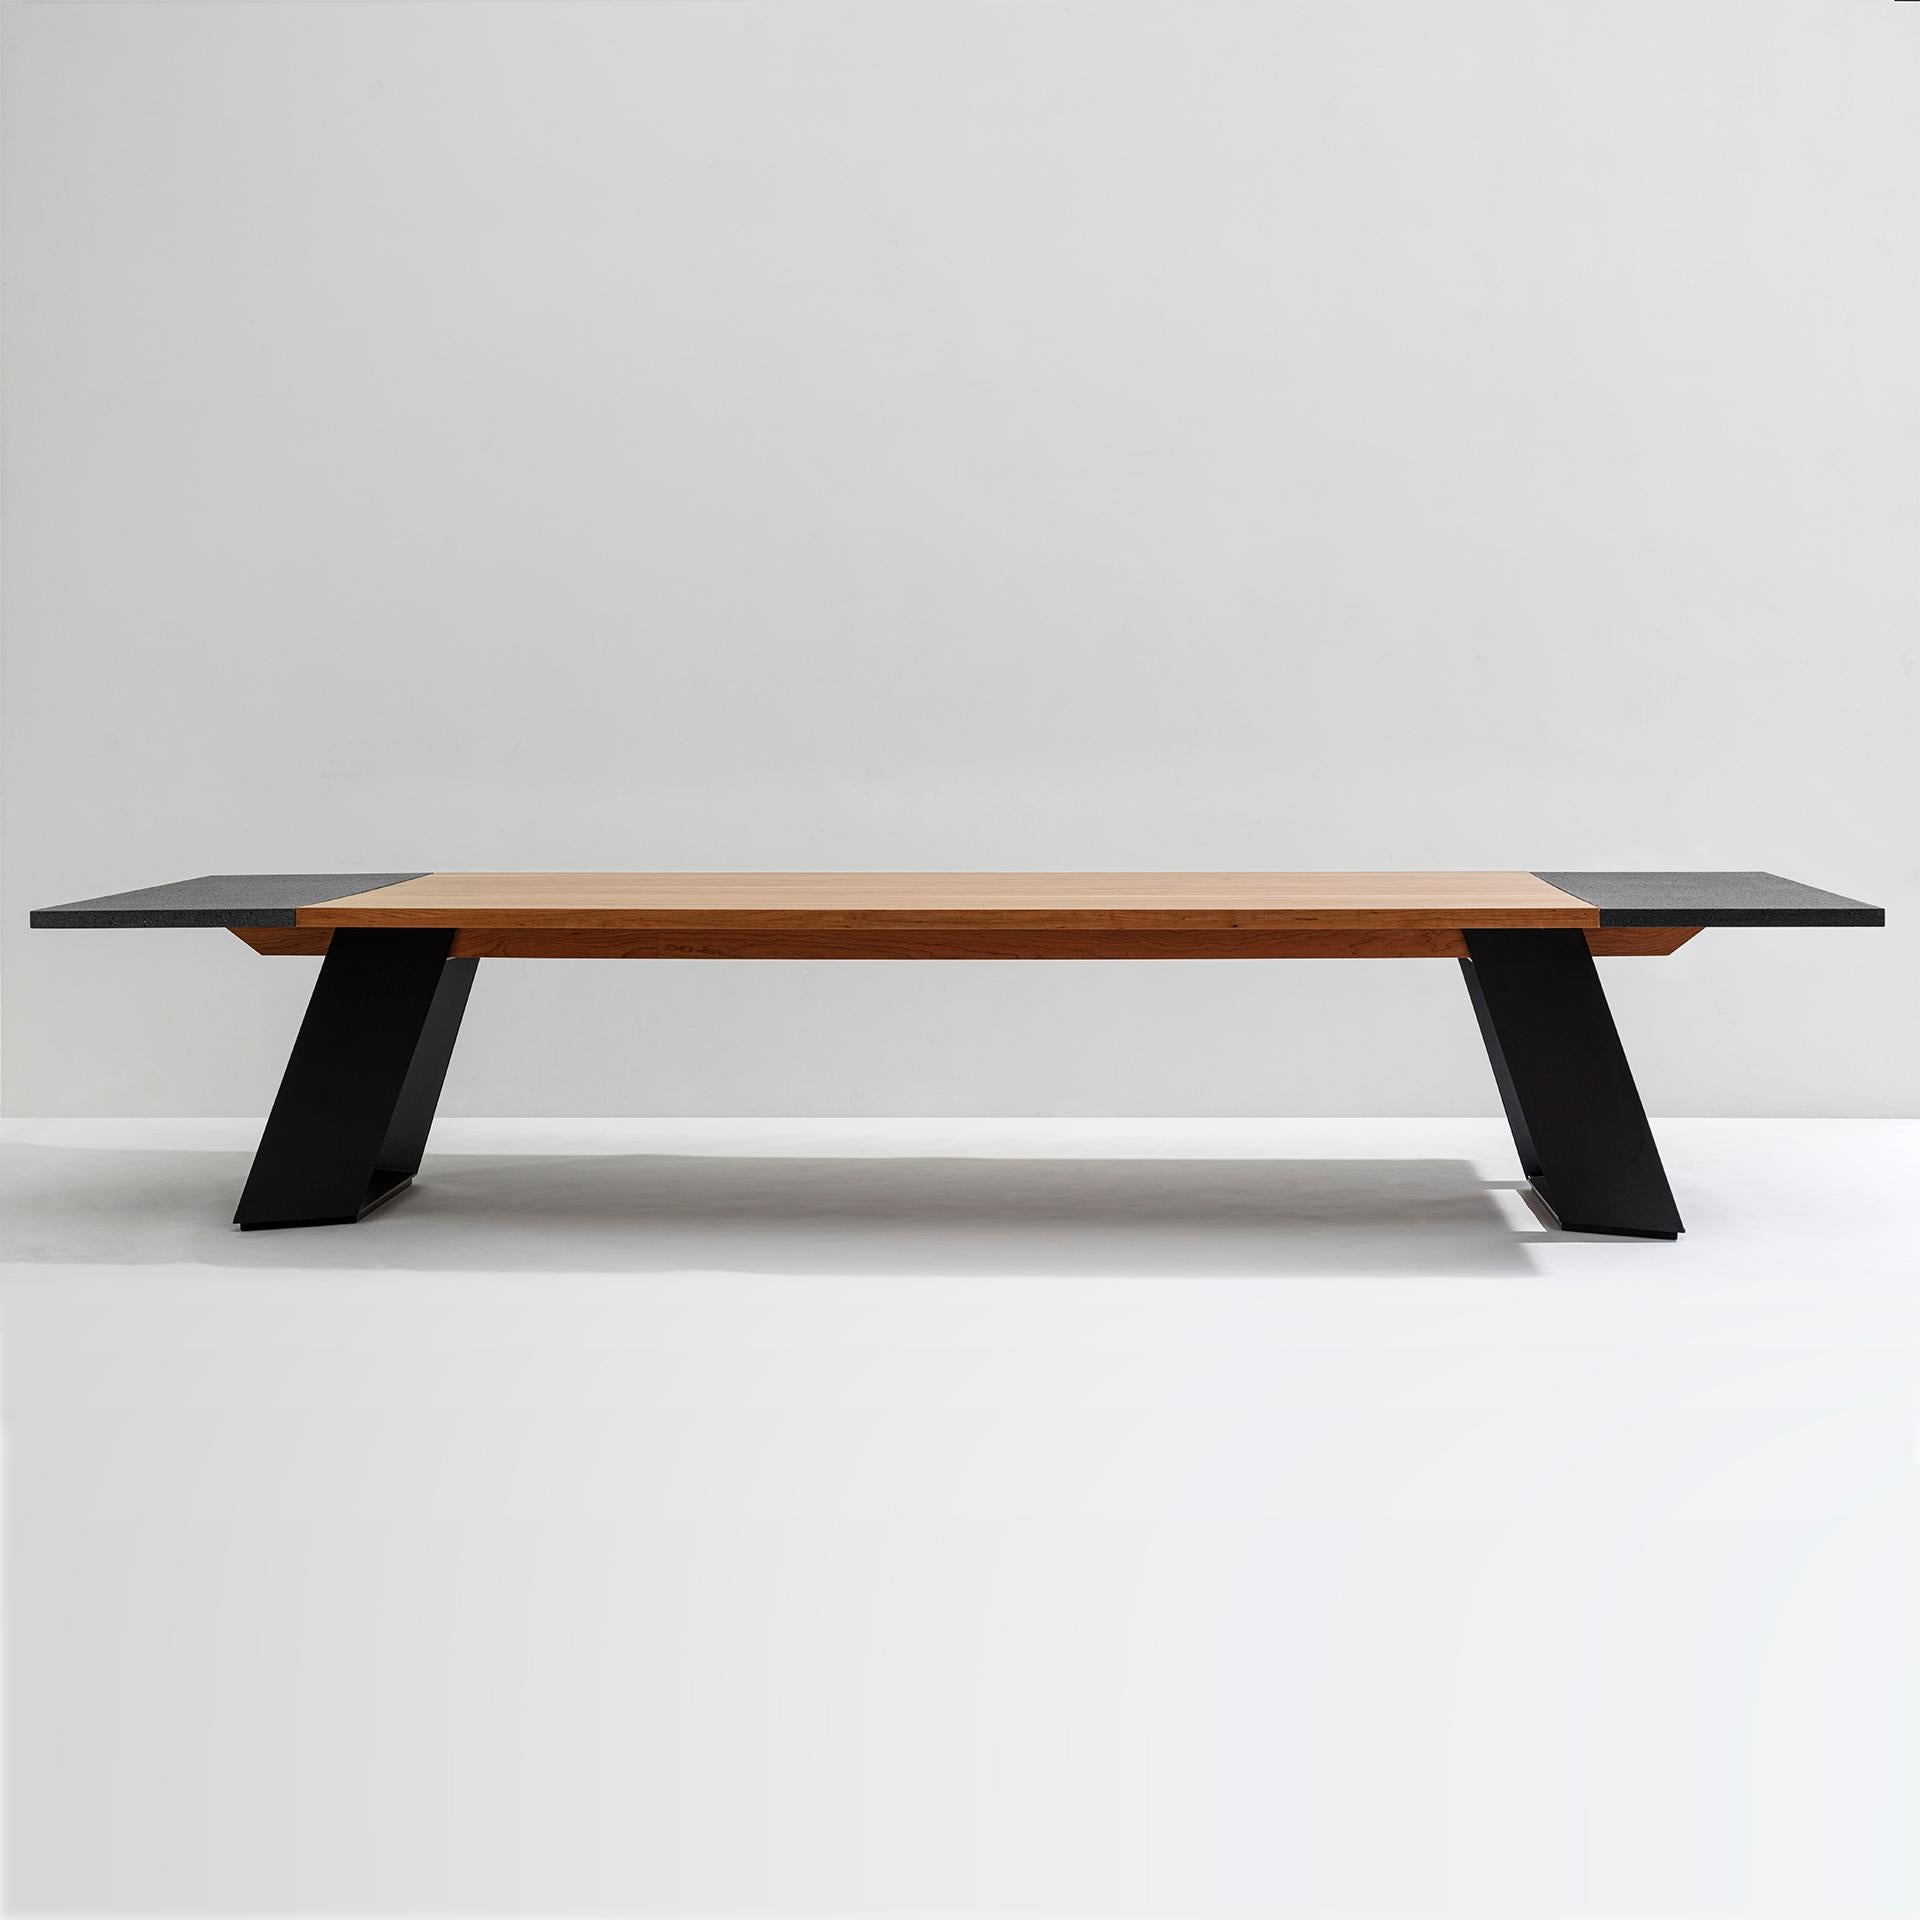 Mexican Tecta dining table made of lava stone, wood and steel by Ricardo Rodriguez Elias For Sale